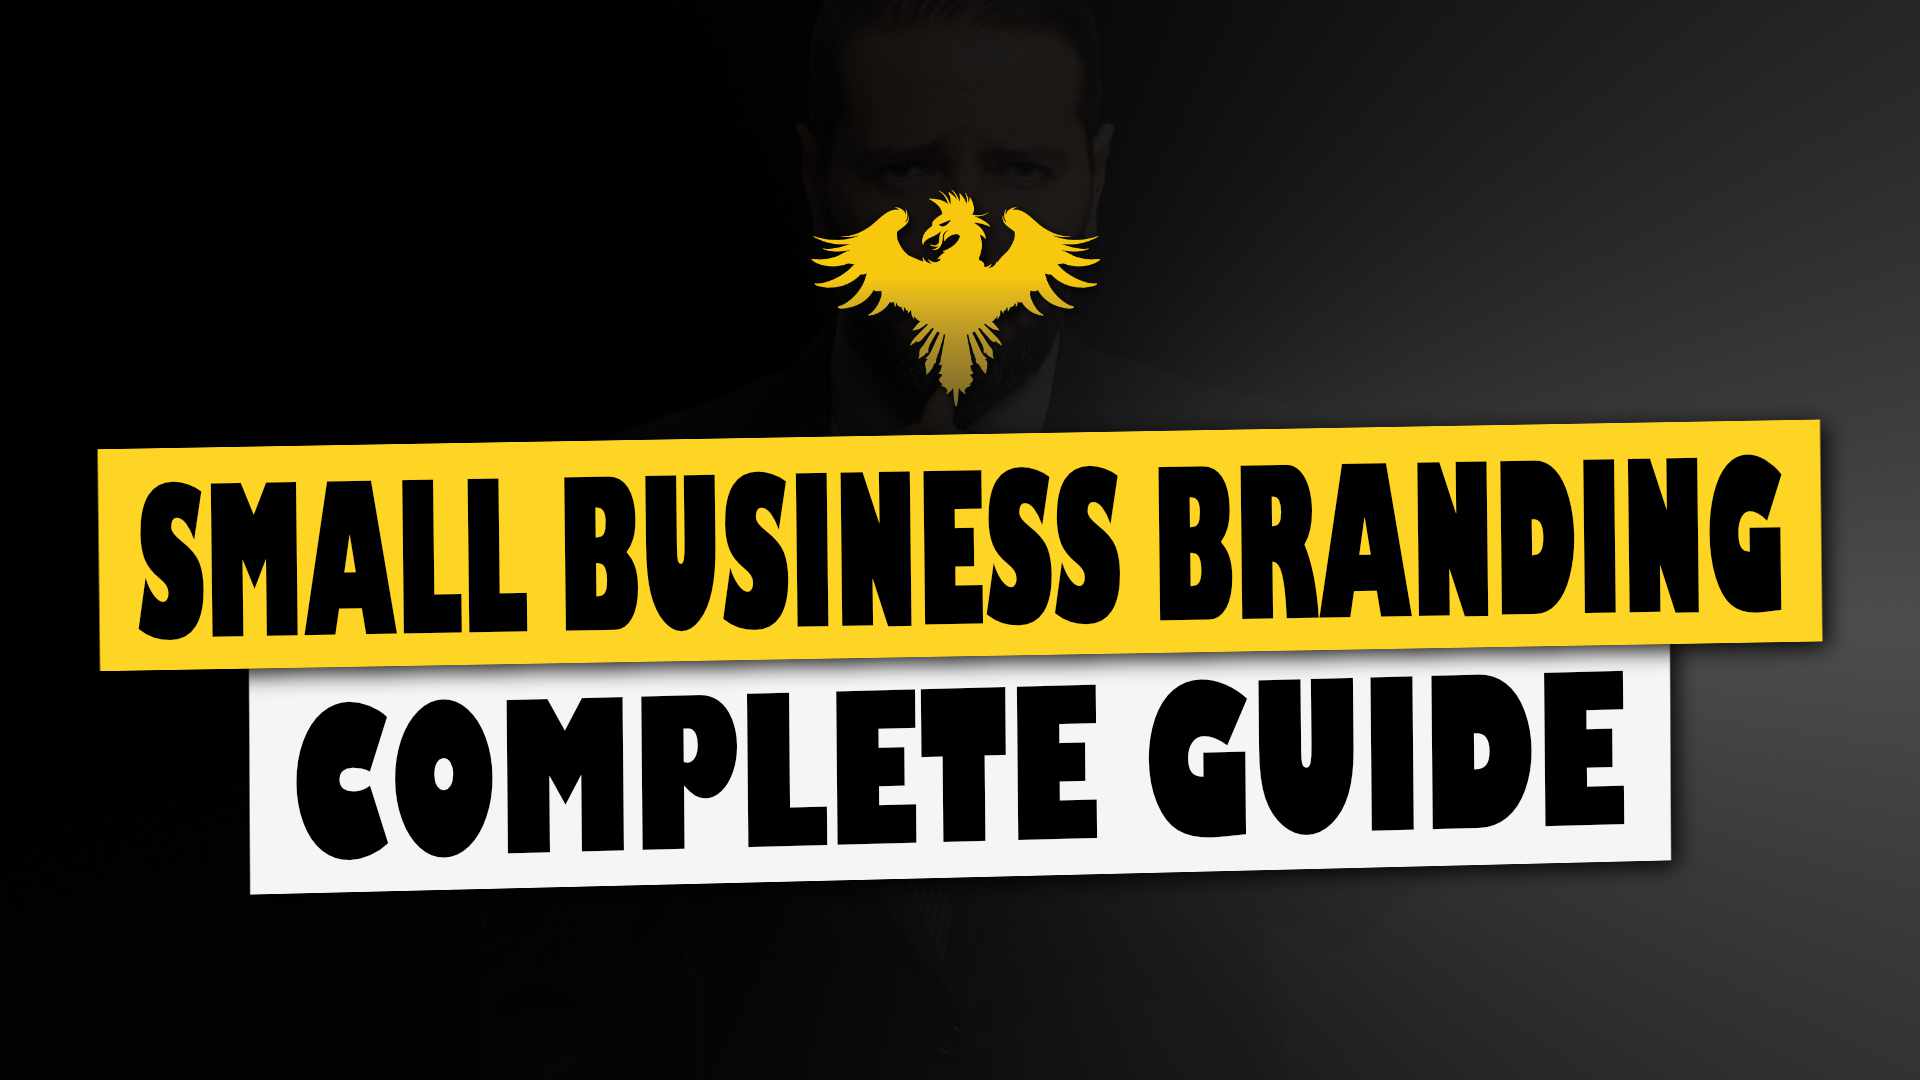 Image of phoenix logo with title small business branding complete guide